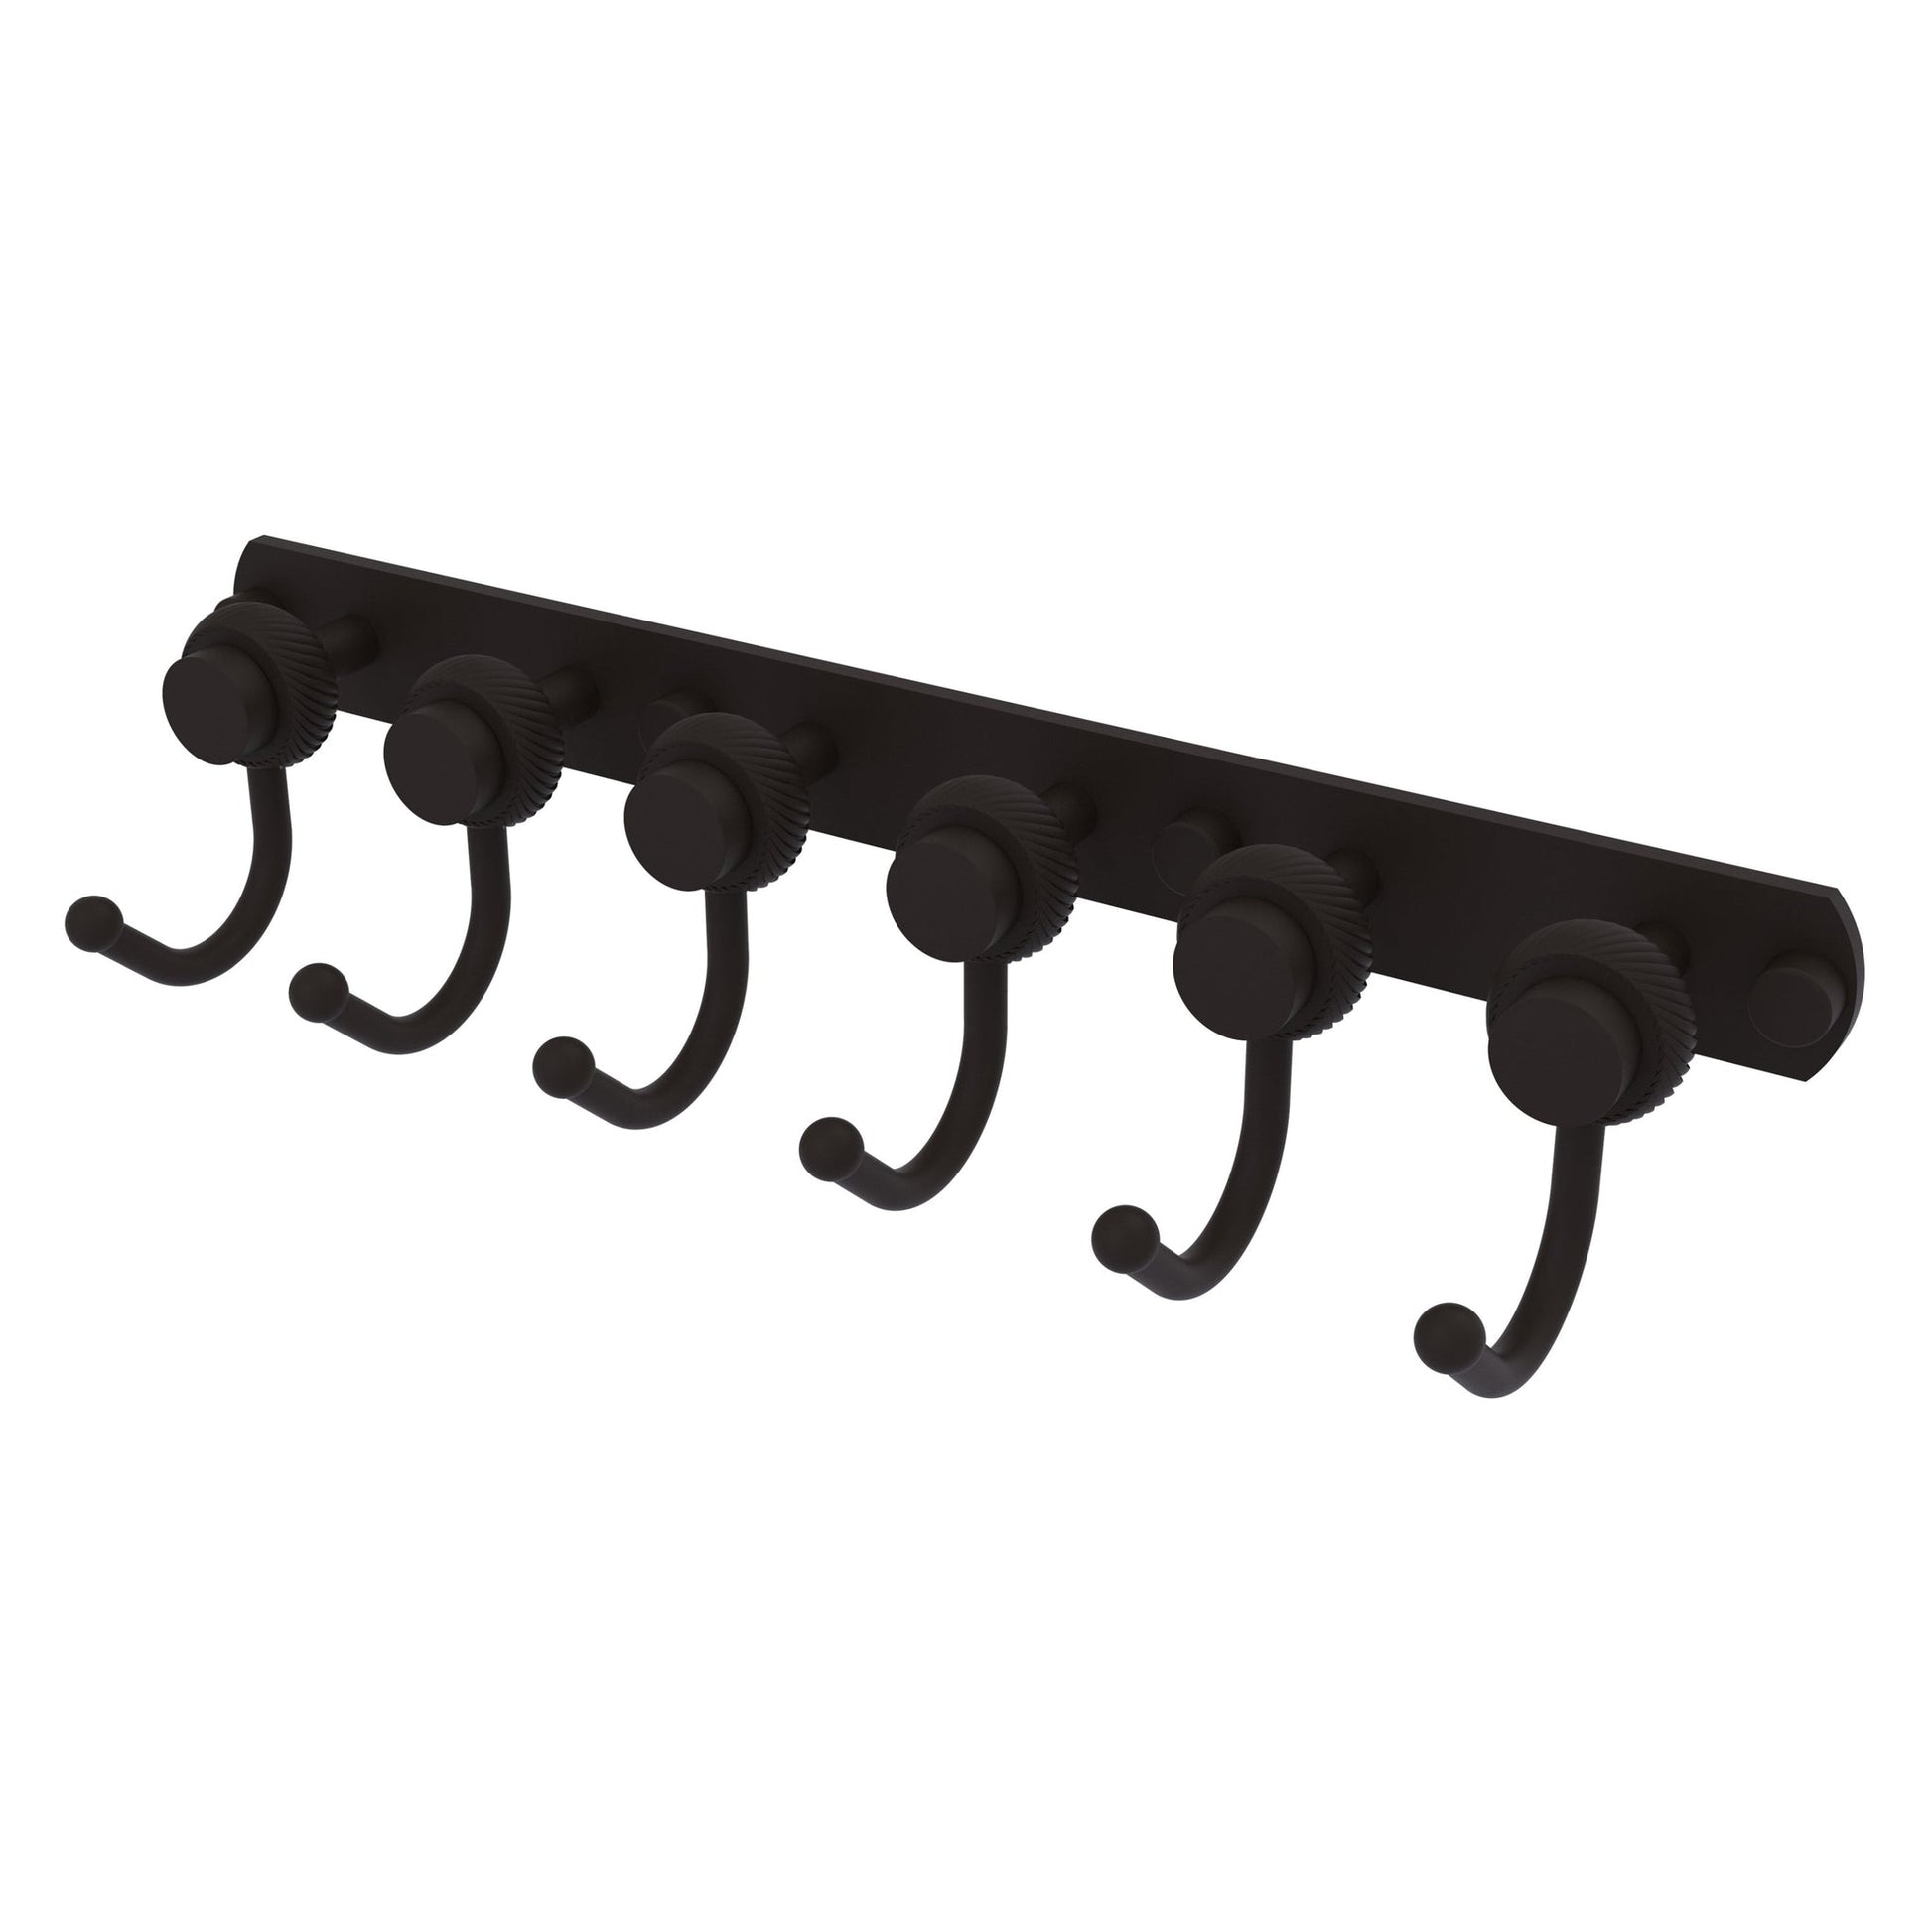 Allied Brass Mercury 15.5" x 4" Oil Rubbed Bronze Solid Brass 6-Position Tie and Belt Rack With Twisted Accent